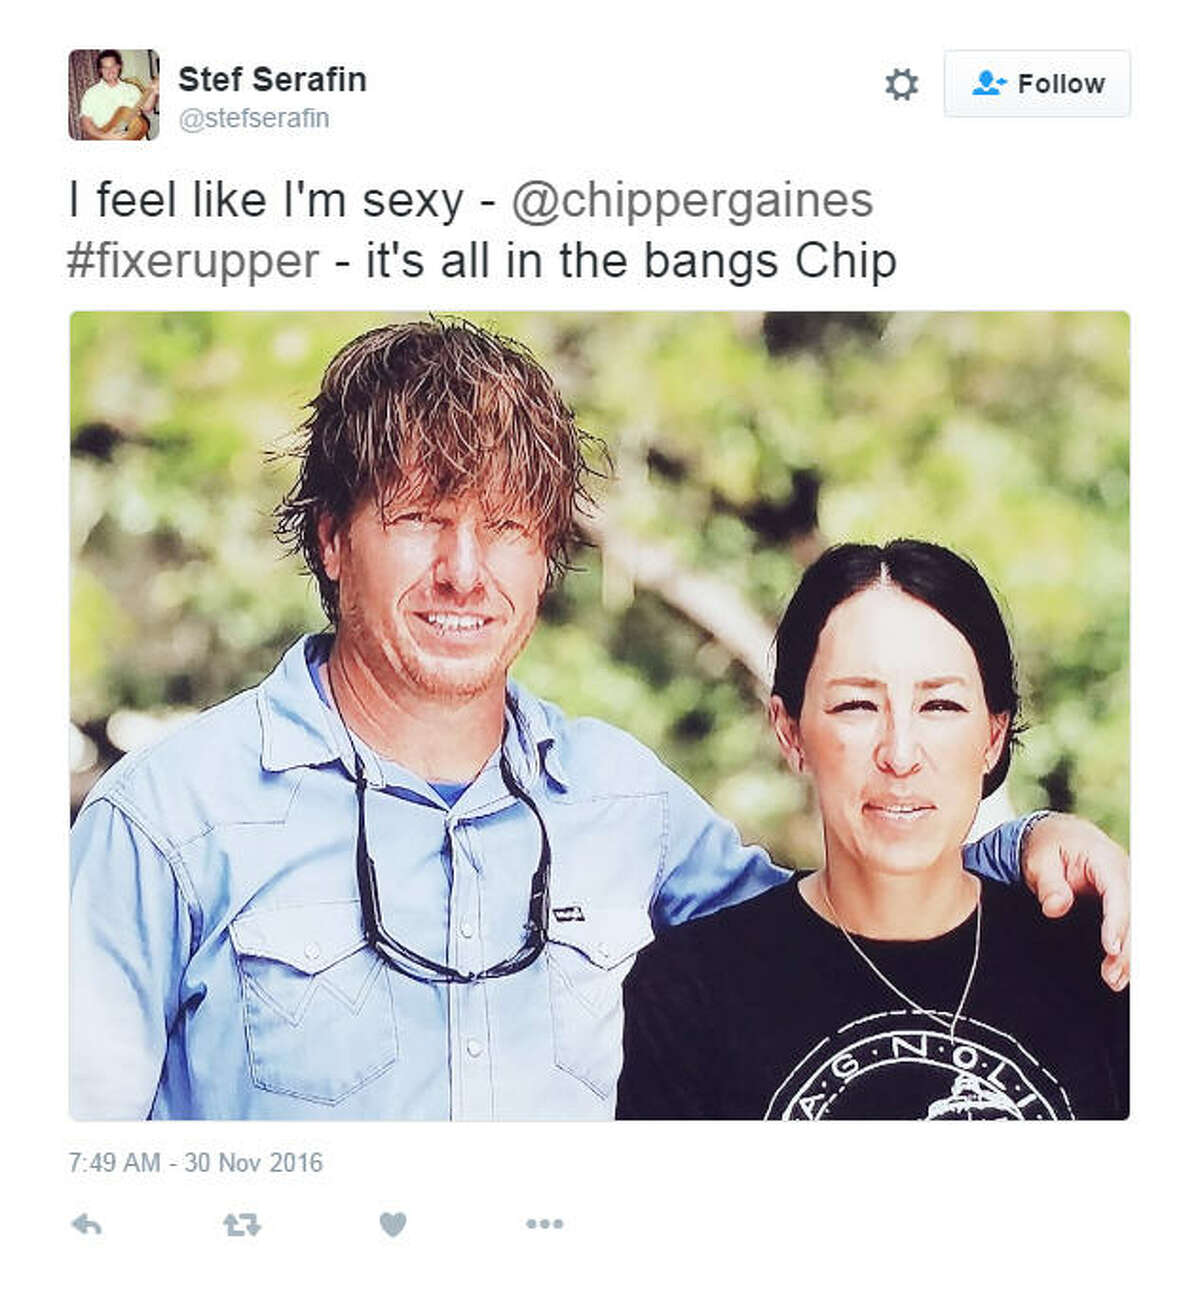 "I feel like I'm sexy - @chippergaines #fixerupper - it's all in the bangs Chip" Source: Twitter